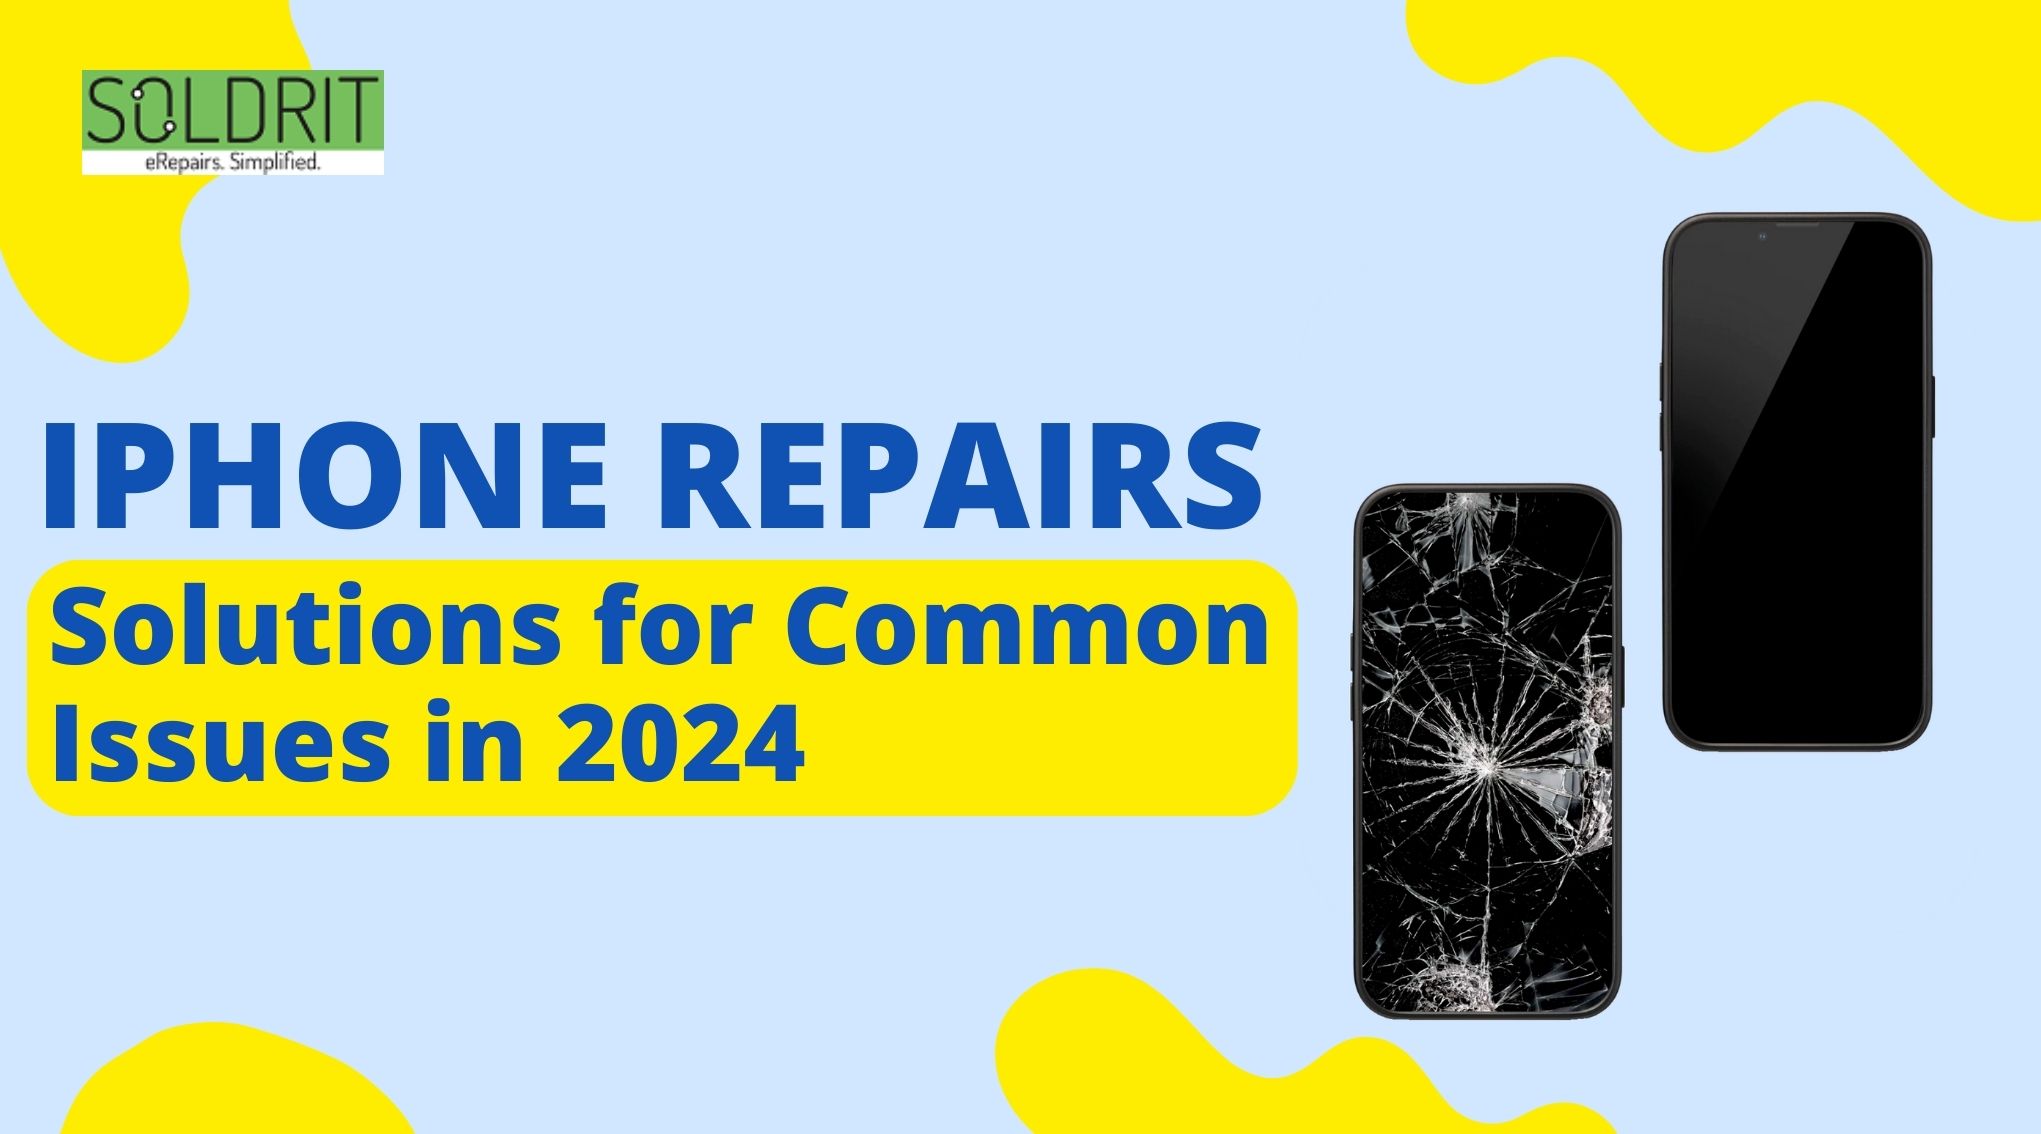 iPhone Repairs Solutions for Common Issues in 2024